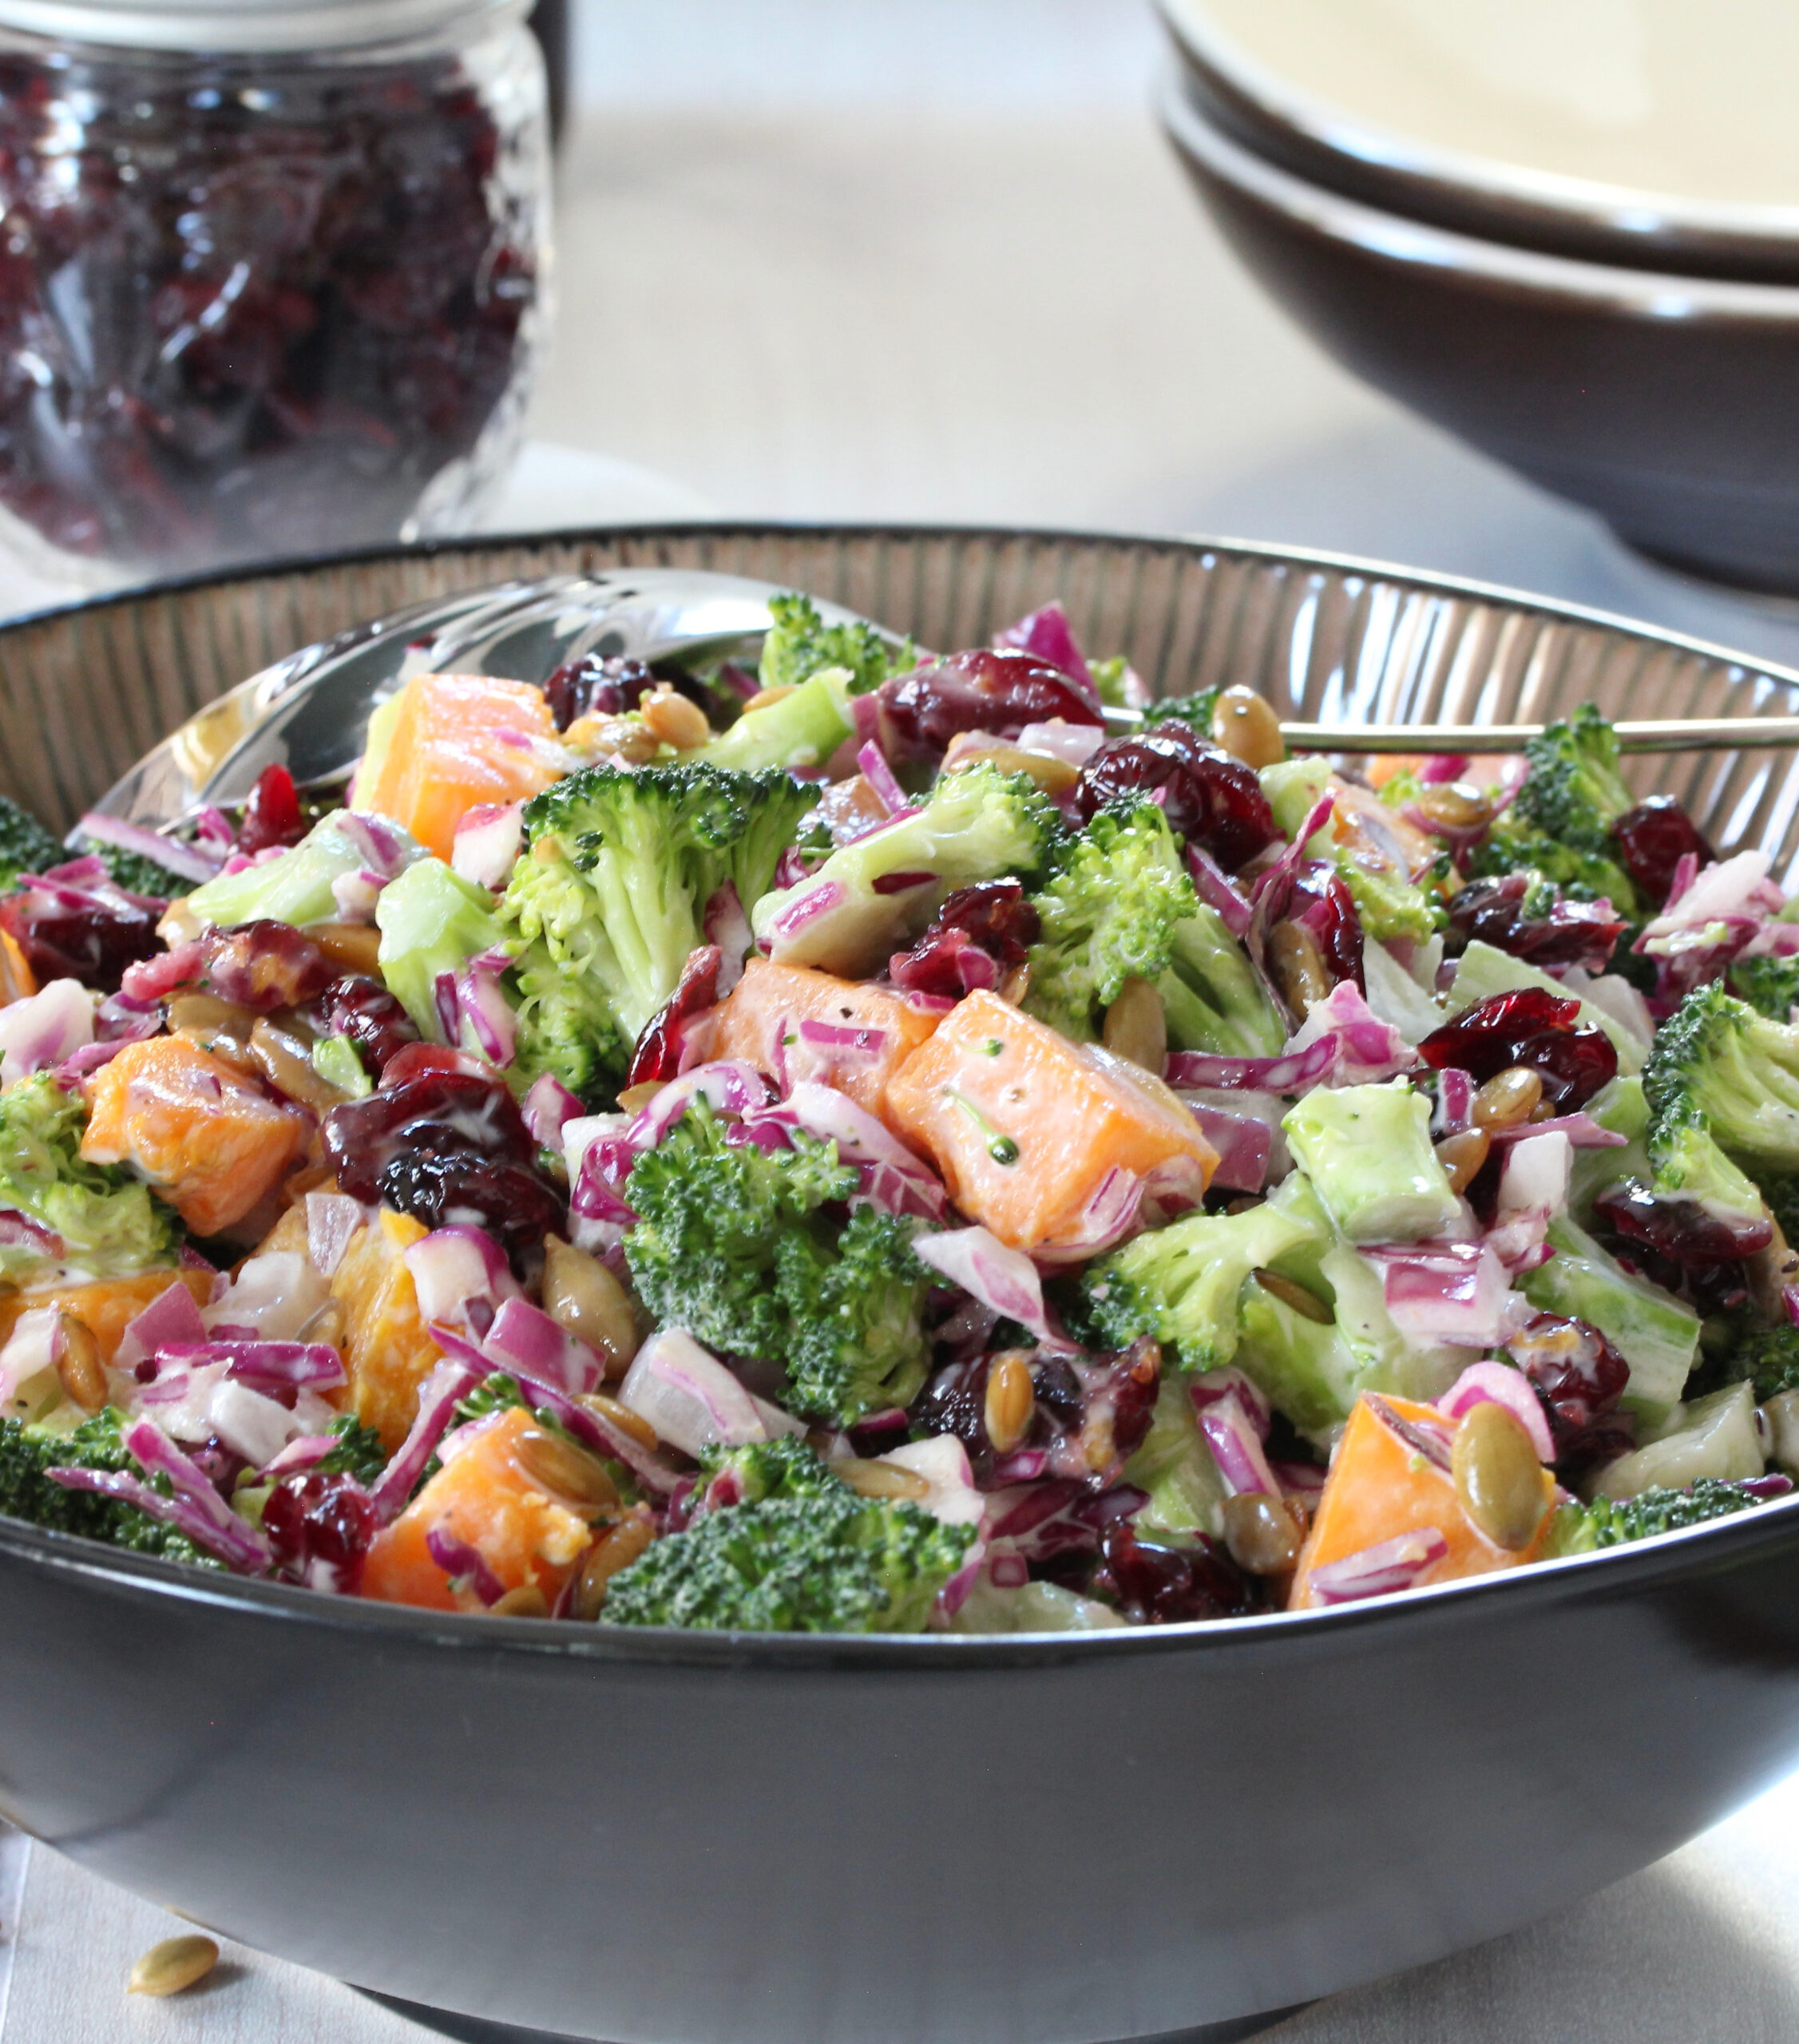 Broccoli and Roasted Butternut Squash Salad